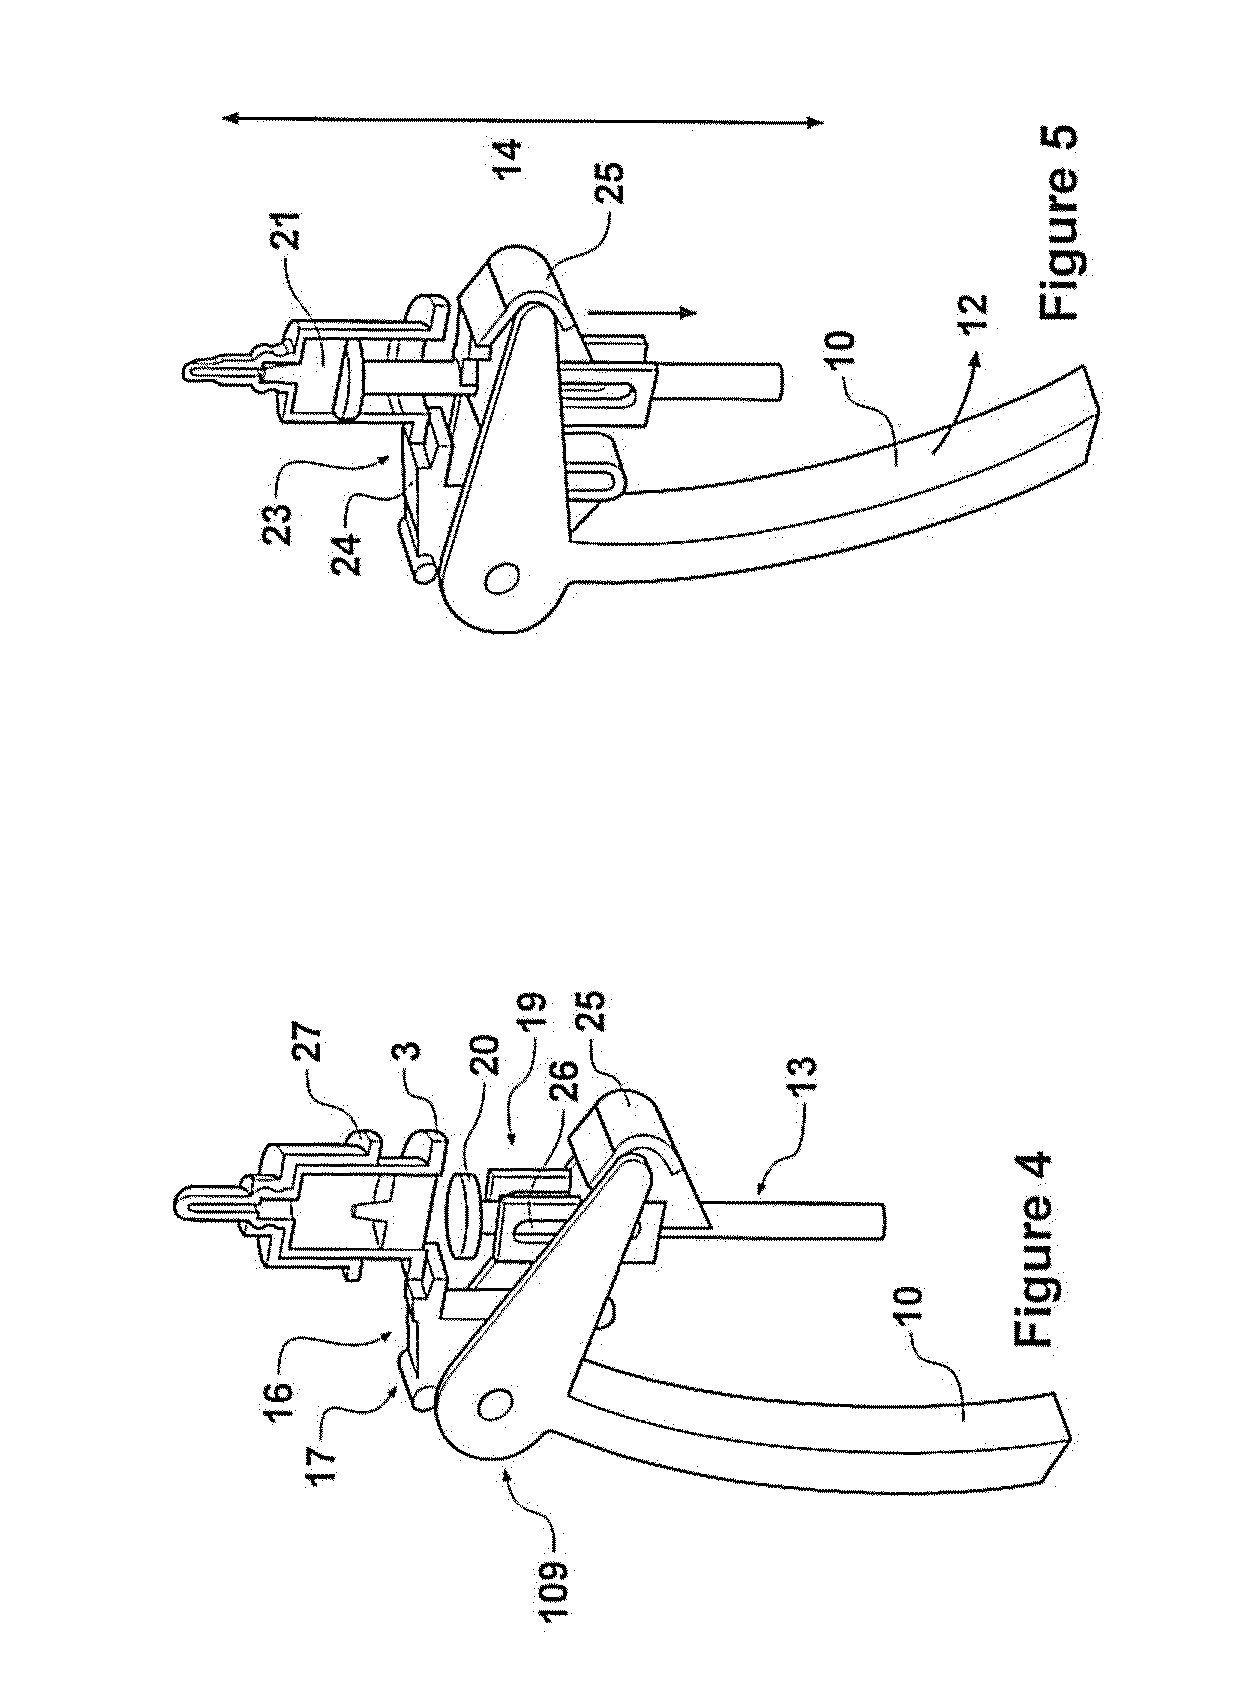 Veterinary syringe for multiple injections